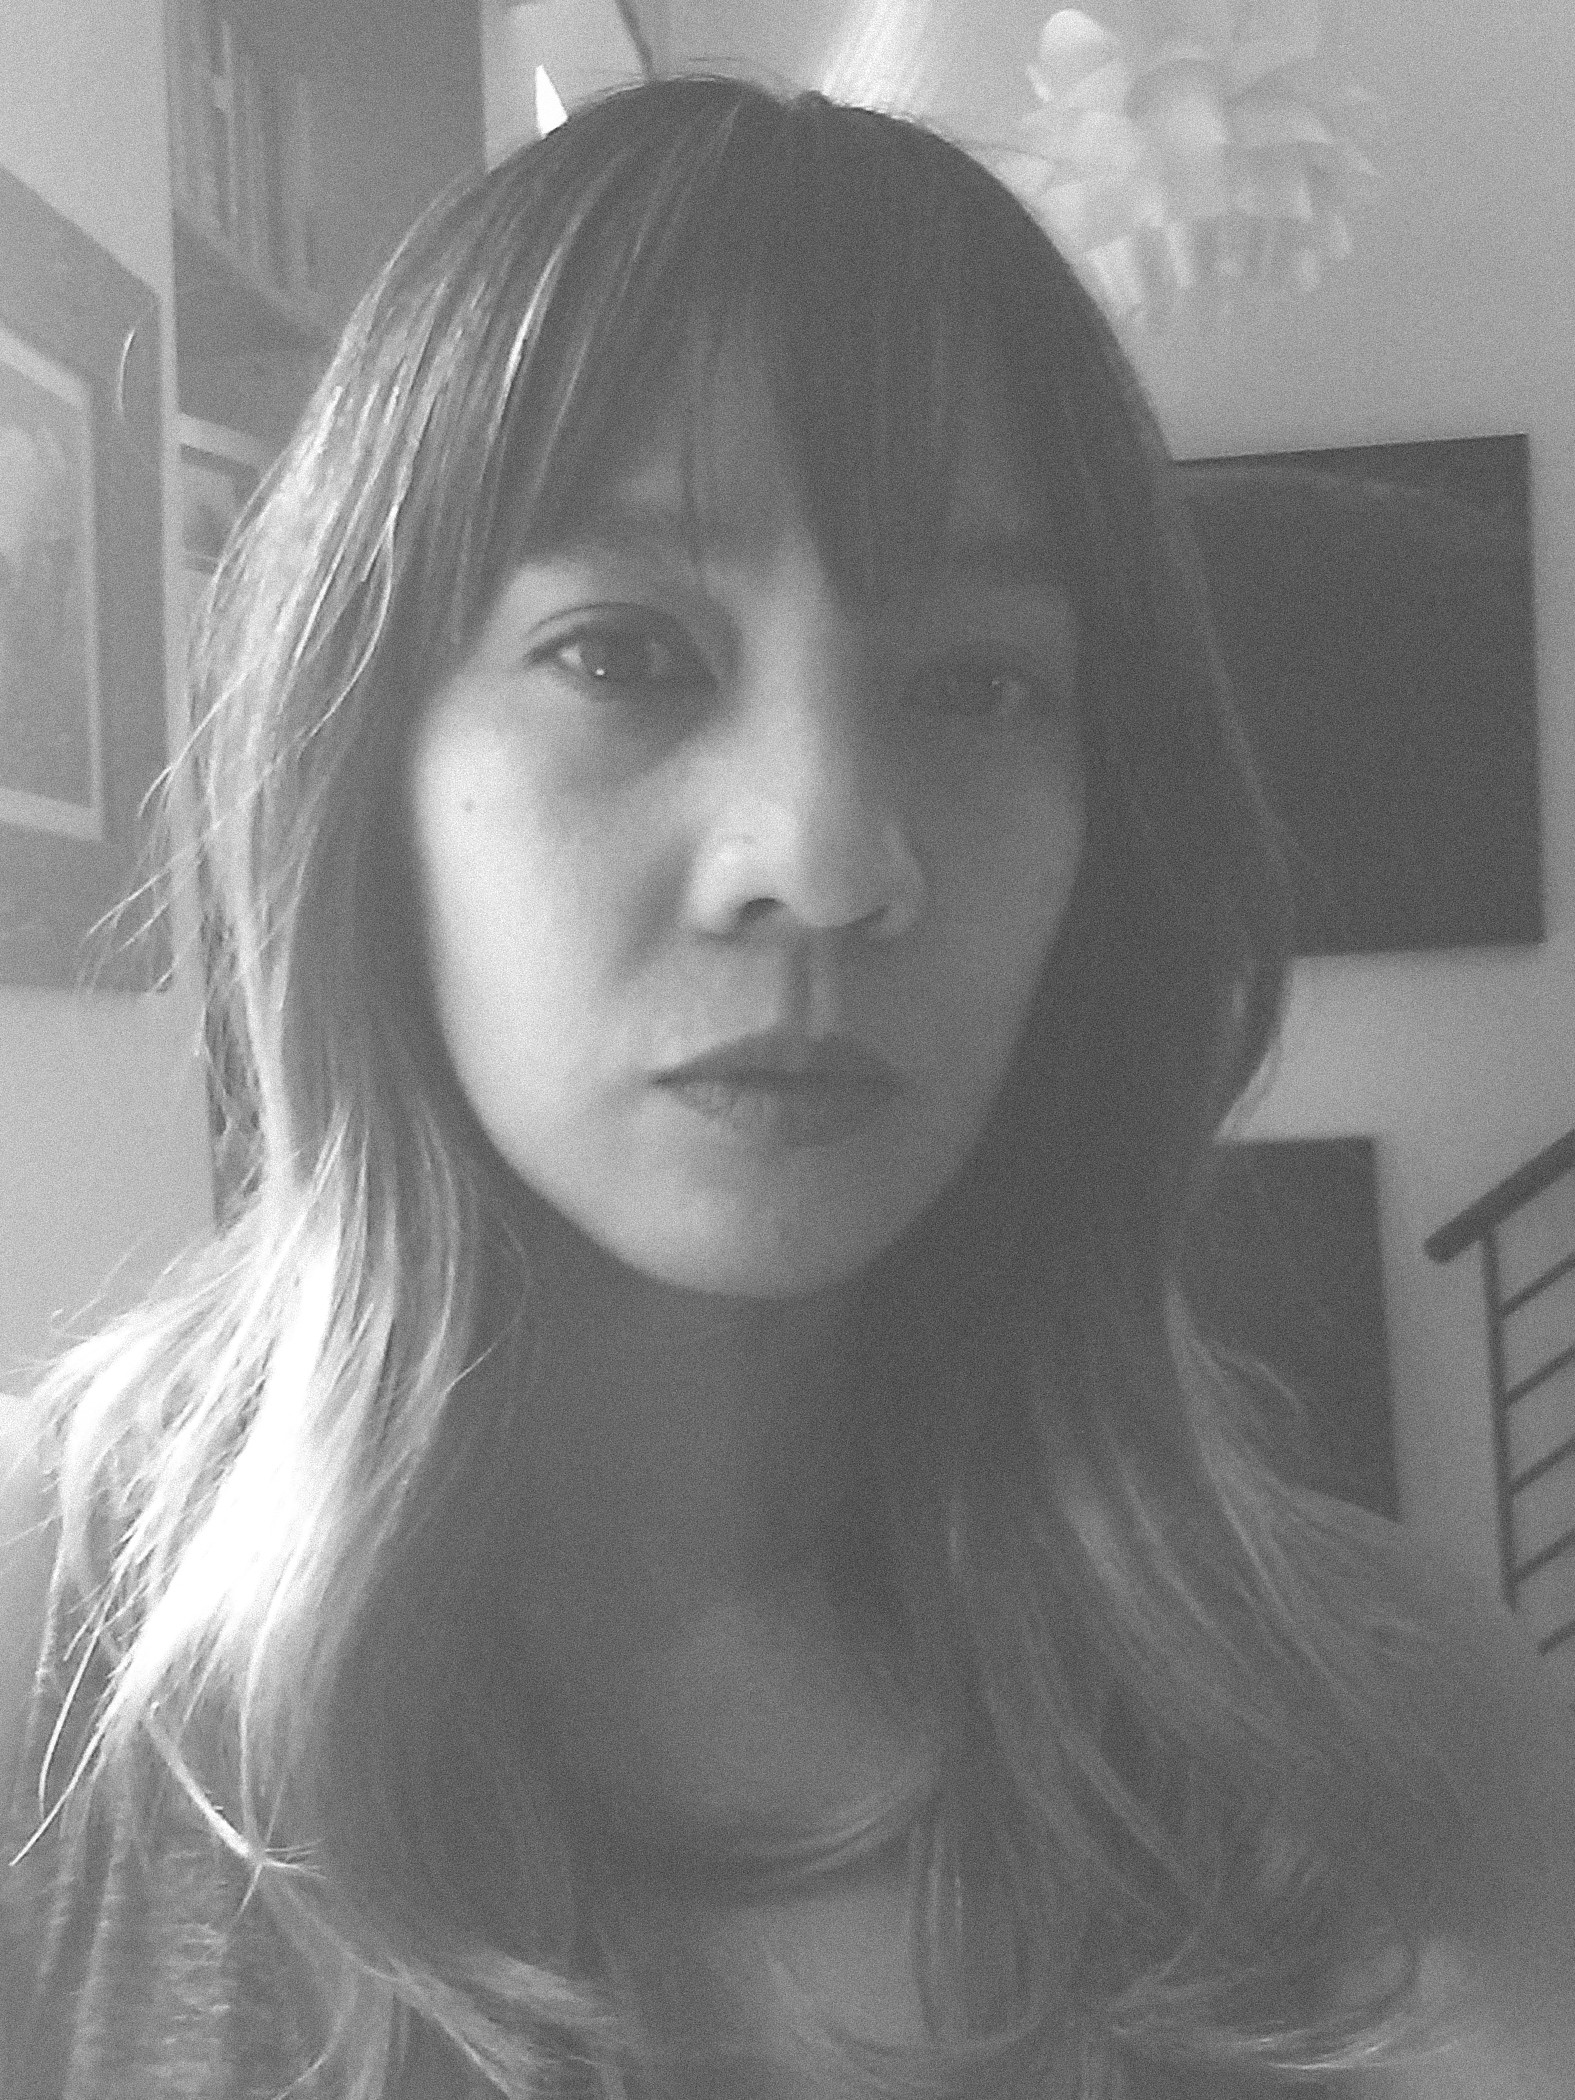 Dao is centered in a portrait-orientation photograph rendered in greyscale. She is seen from the shoulders up, looking at the camera.